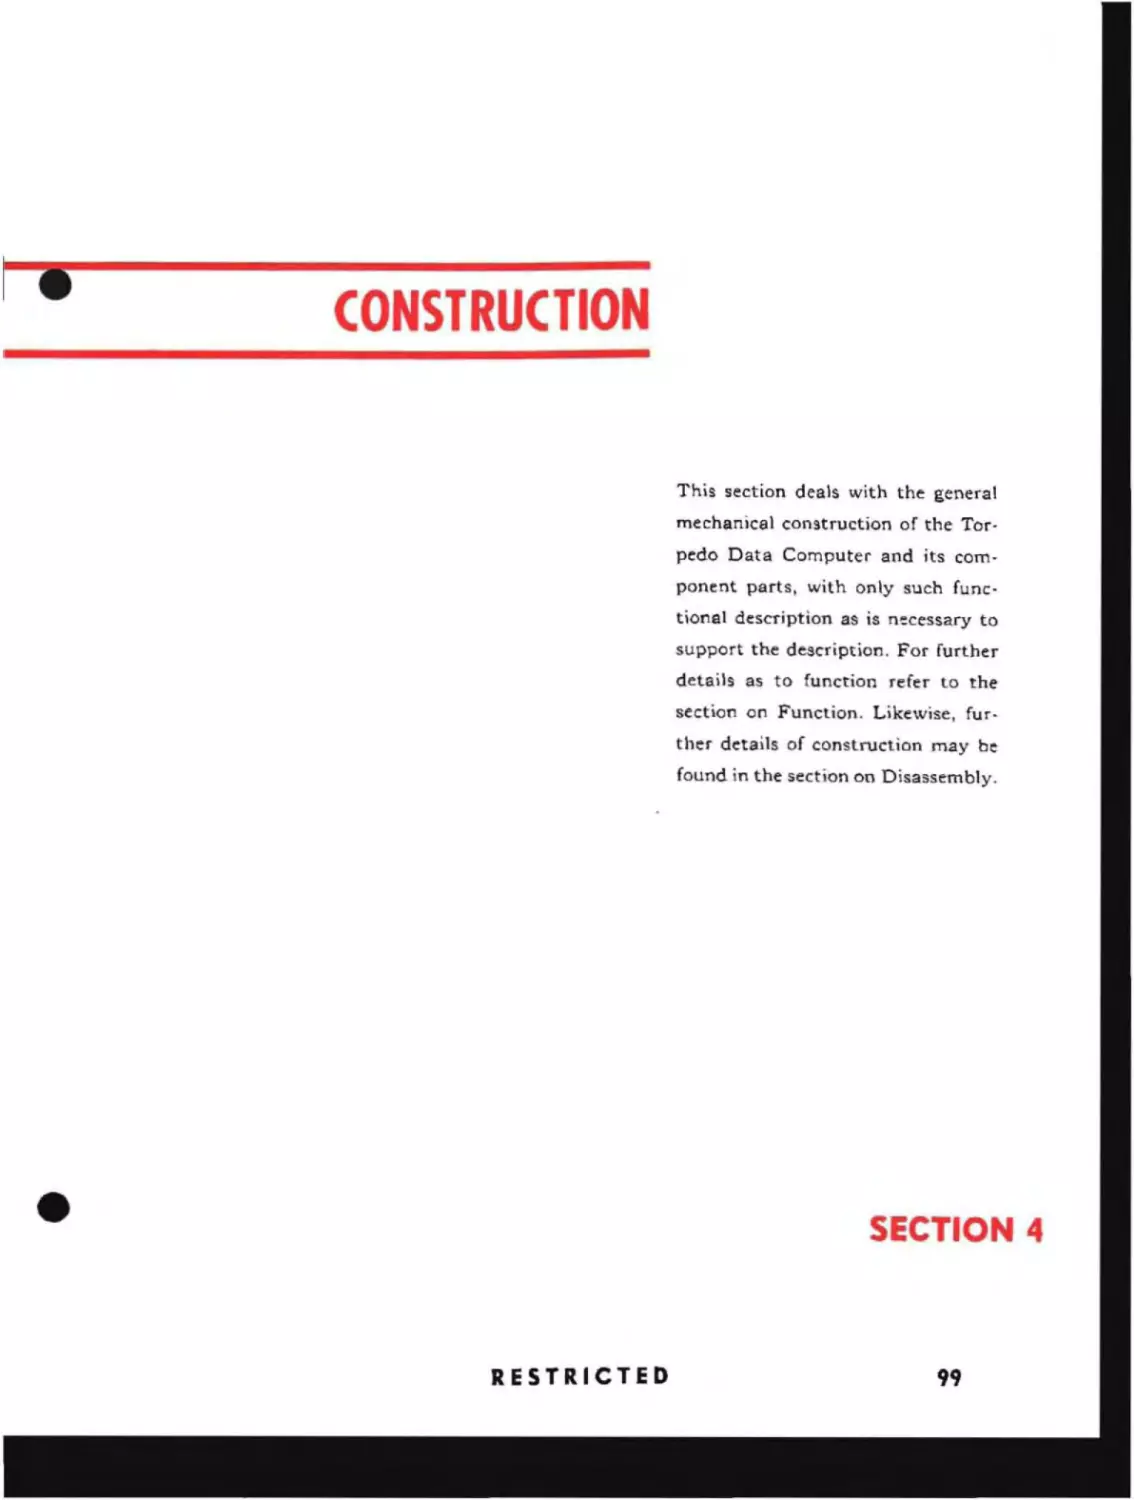 Page 99, Construction